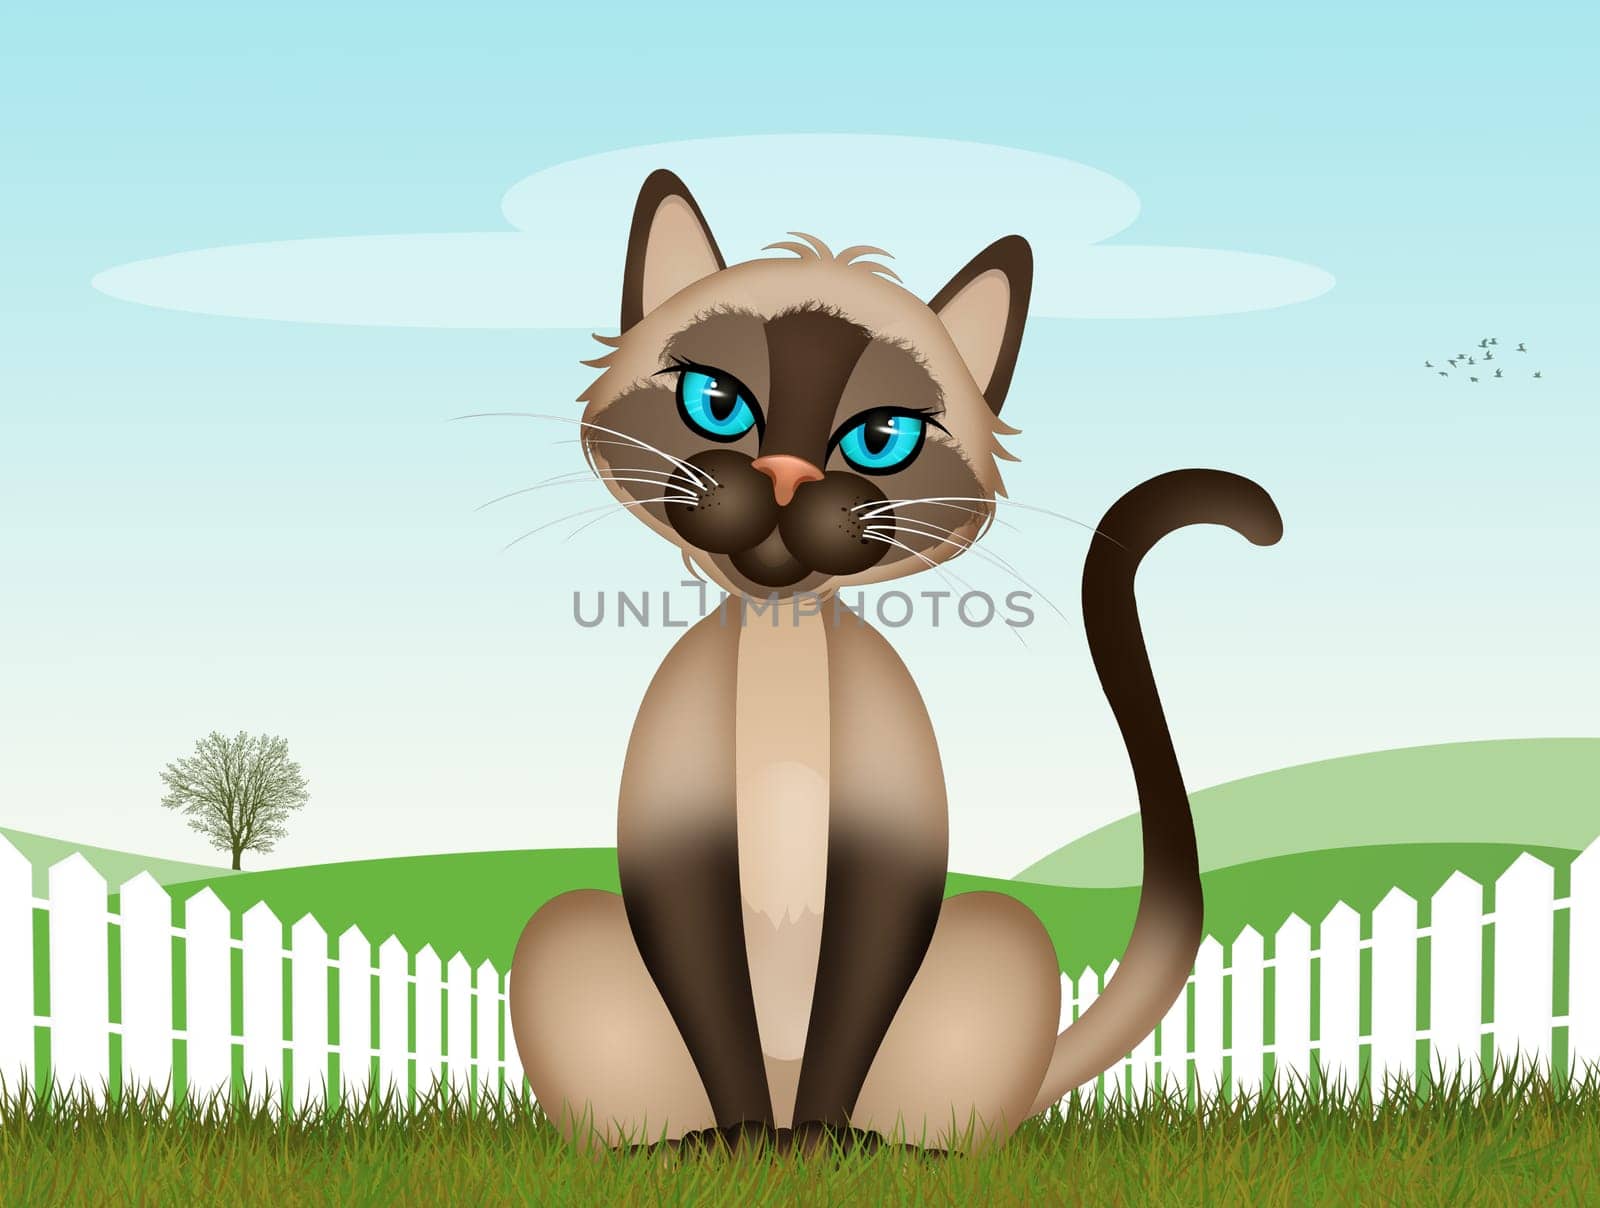 illustration of the Siamese cat in the grass by adrenalina